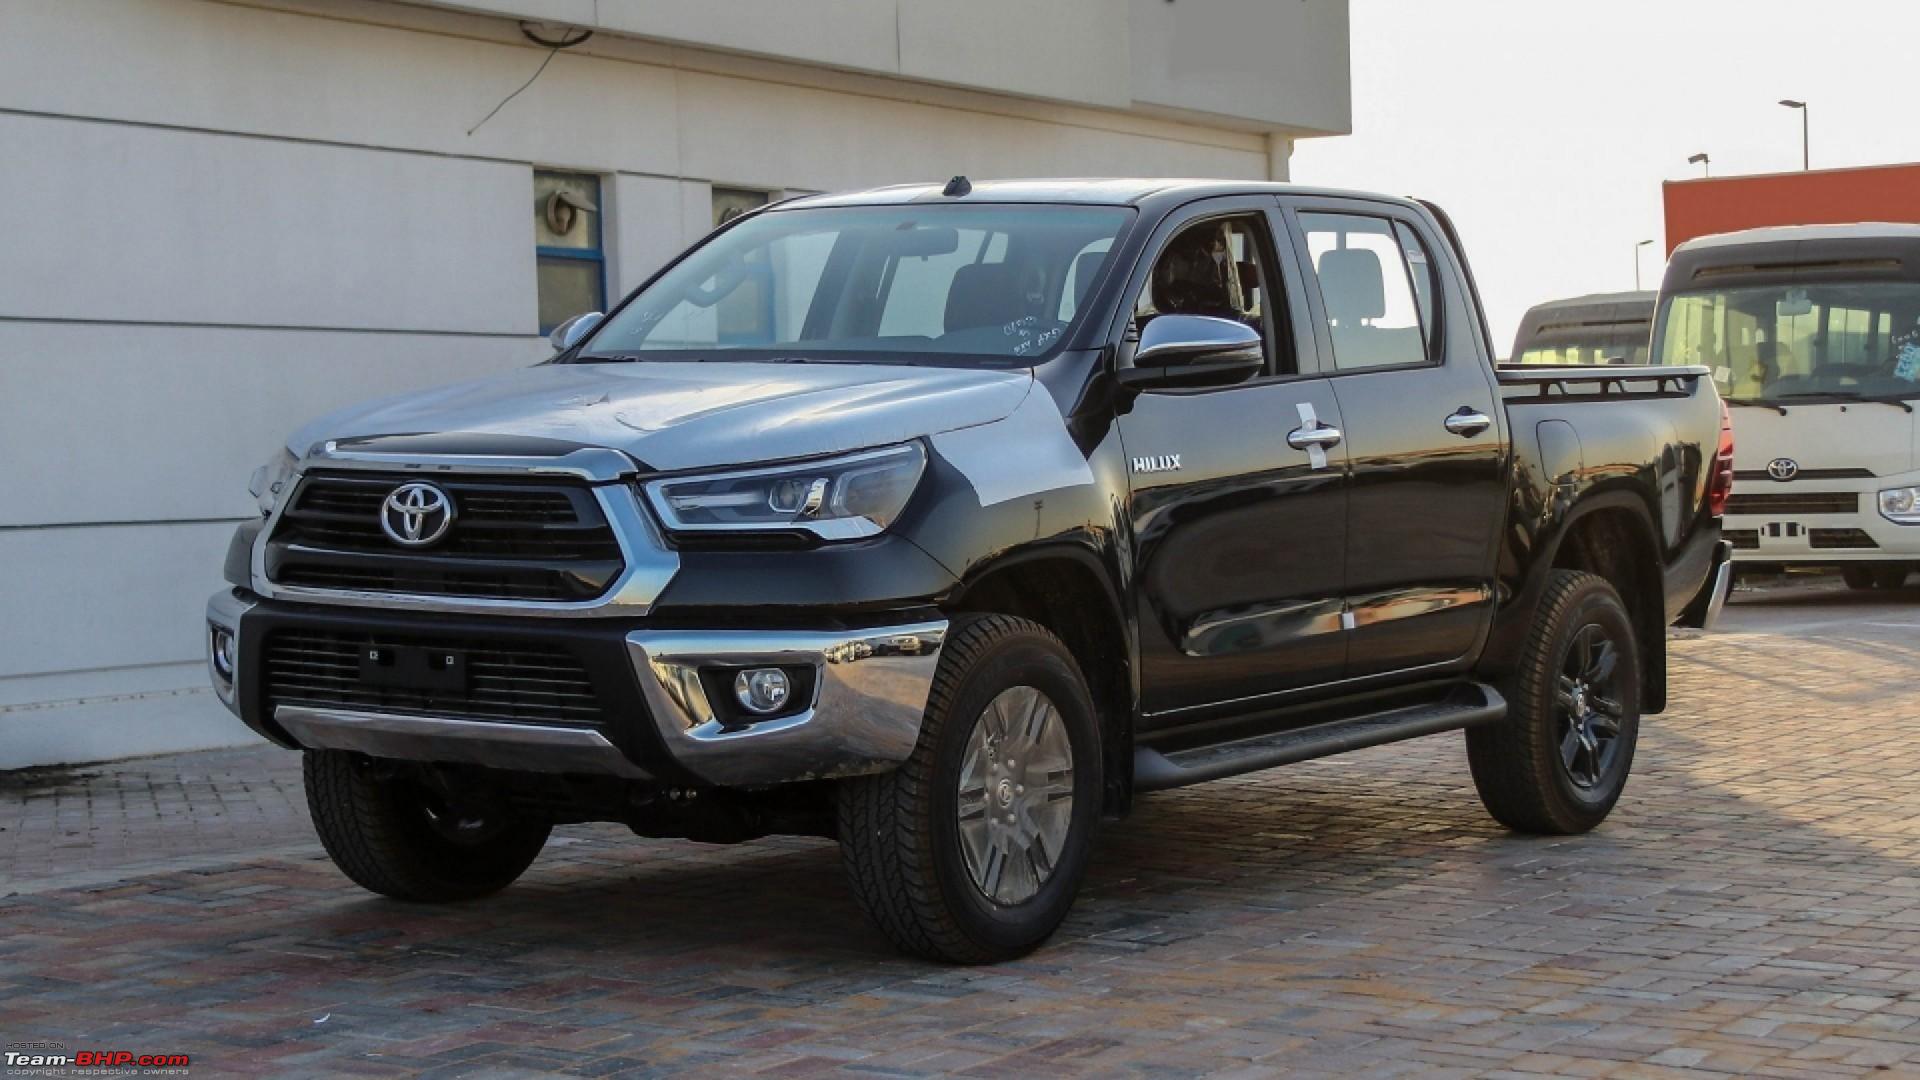 Toyota Hilux Pick-up Bookings Restart After Almost One Year, Price Stays  Unchanged - News18, toyota hilux